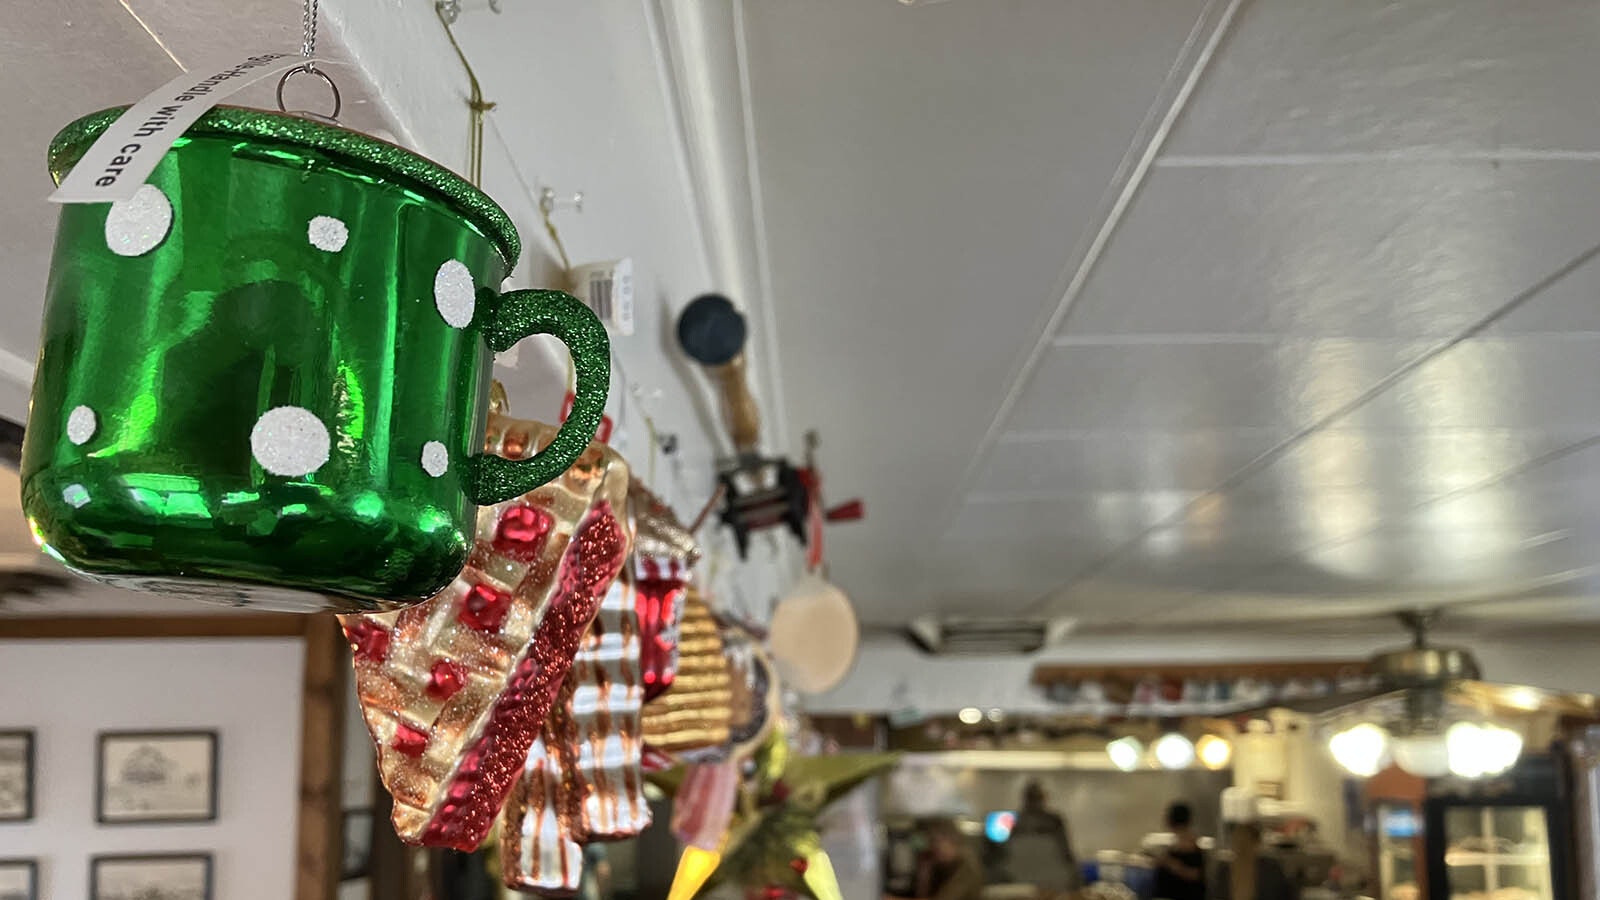 Holiday ornaments with food themes decorate the ceiling of Sherrie’s Place as a testament to her customer’s loyalty. She offered them free dessert for an ornament. She now has more than 100.